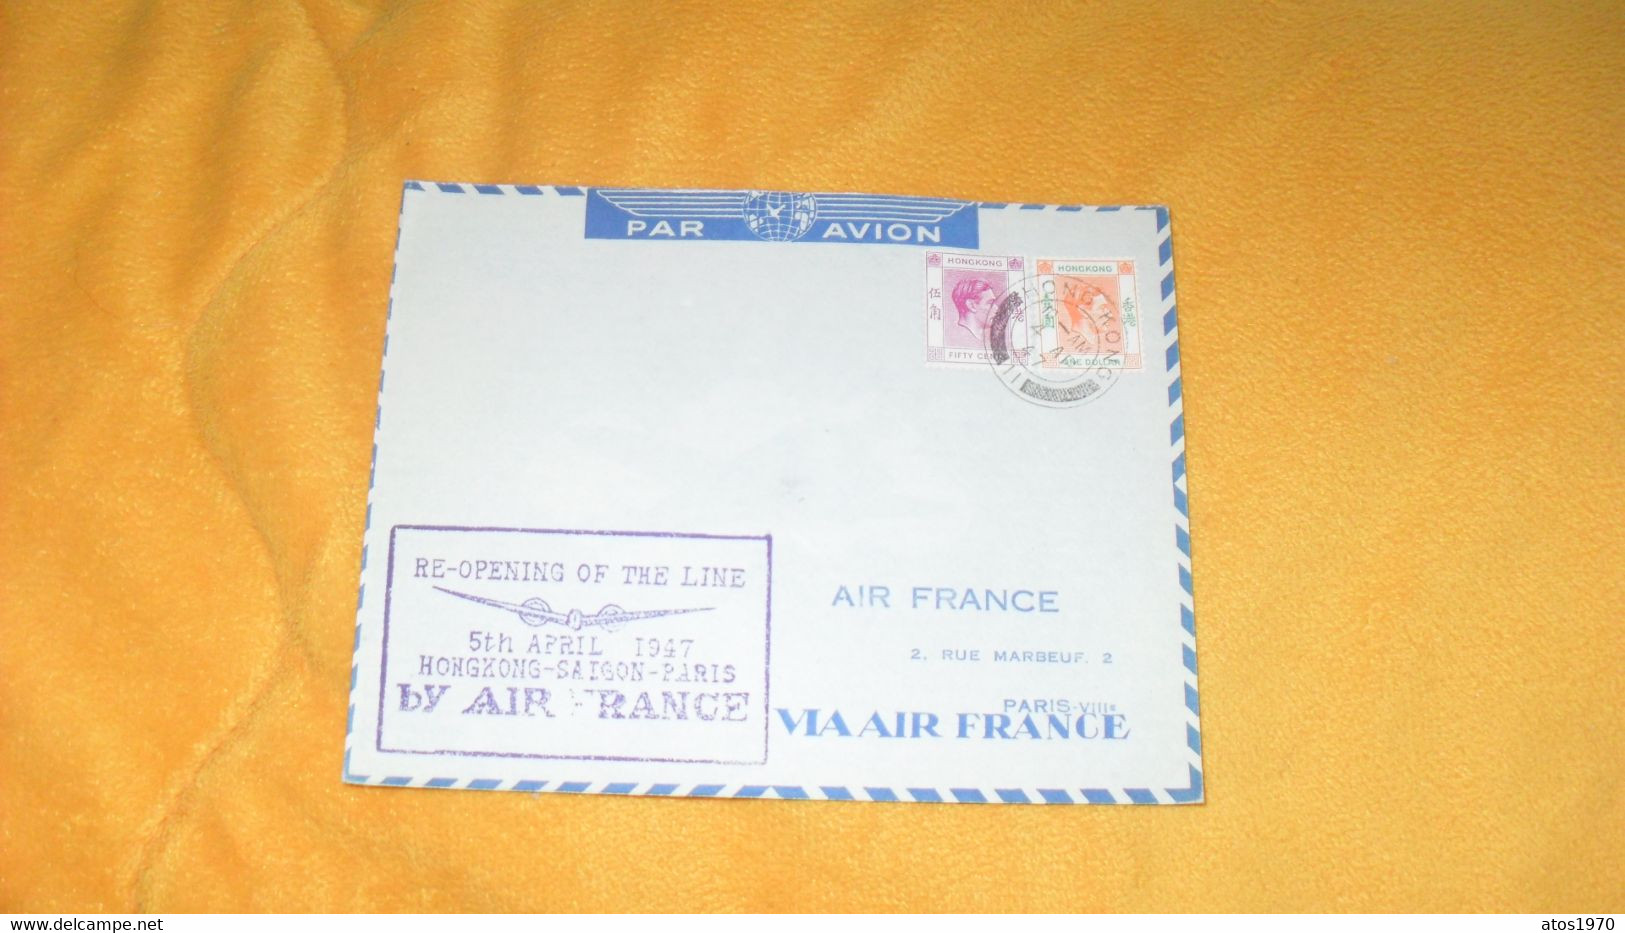 ENVELOPPE ANCIENNE DE 1947../ RE-OPENING OF THE LINE 5TH APRIL 1947 HONGKONG SAIGON PARIS BY AIR FRANCE..CACHETS + TIMBR - Lettres & Documents